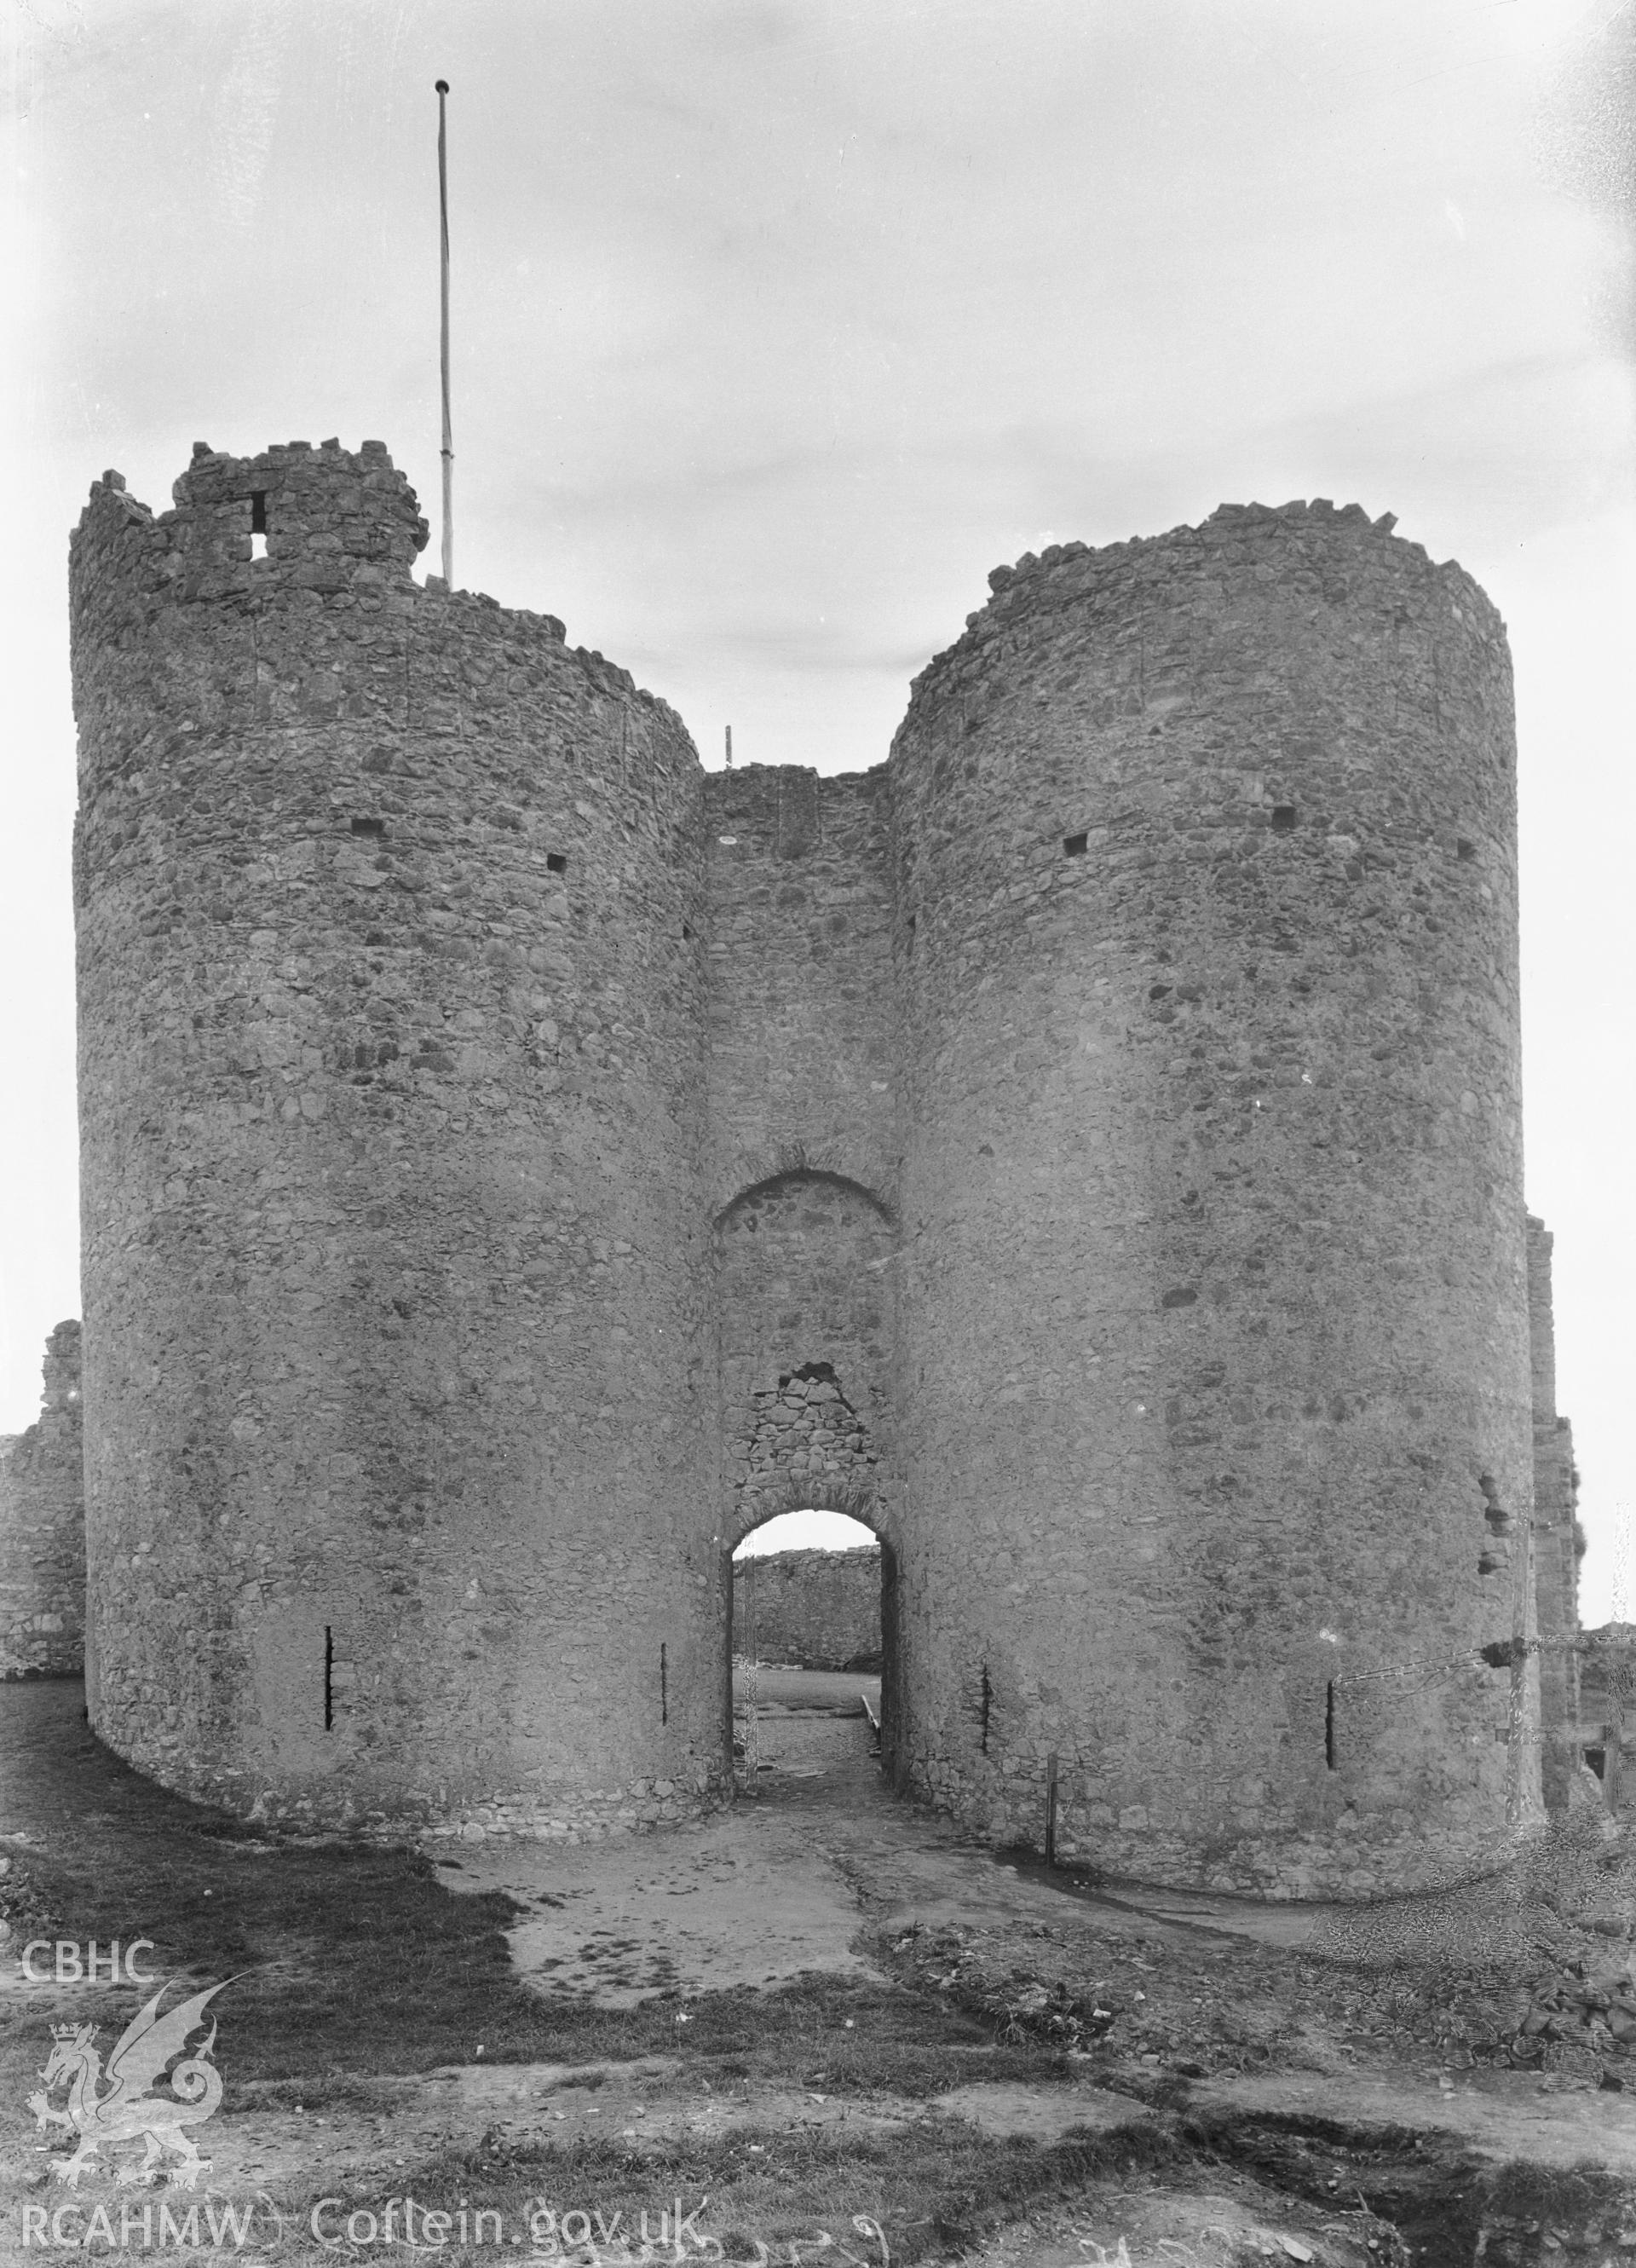 Black and white print of Criccieth Castle, produced by the Ministry of Works.